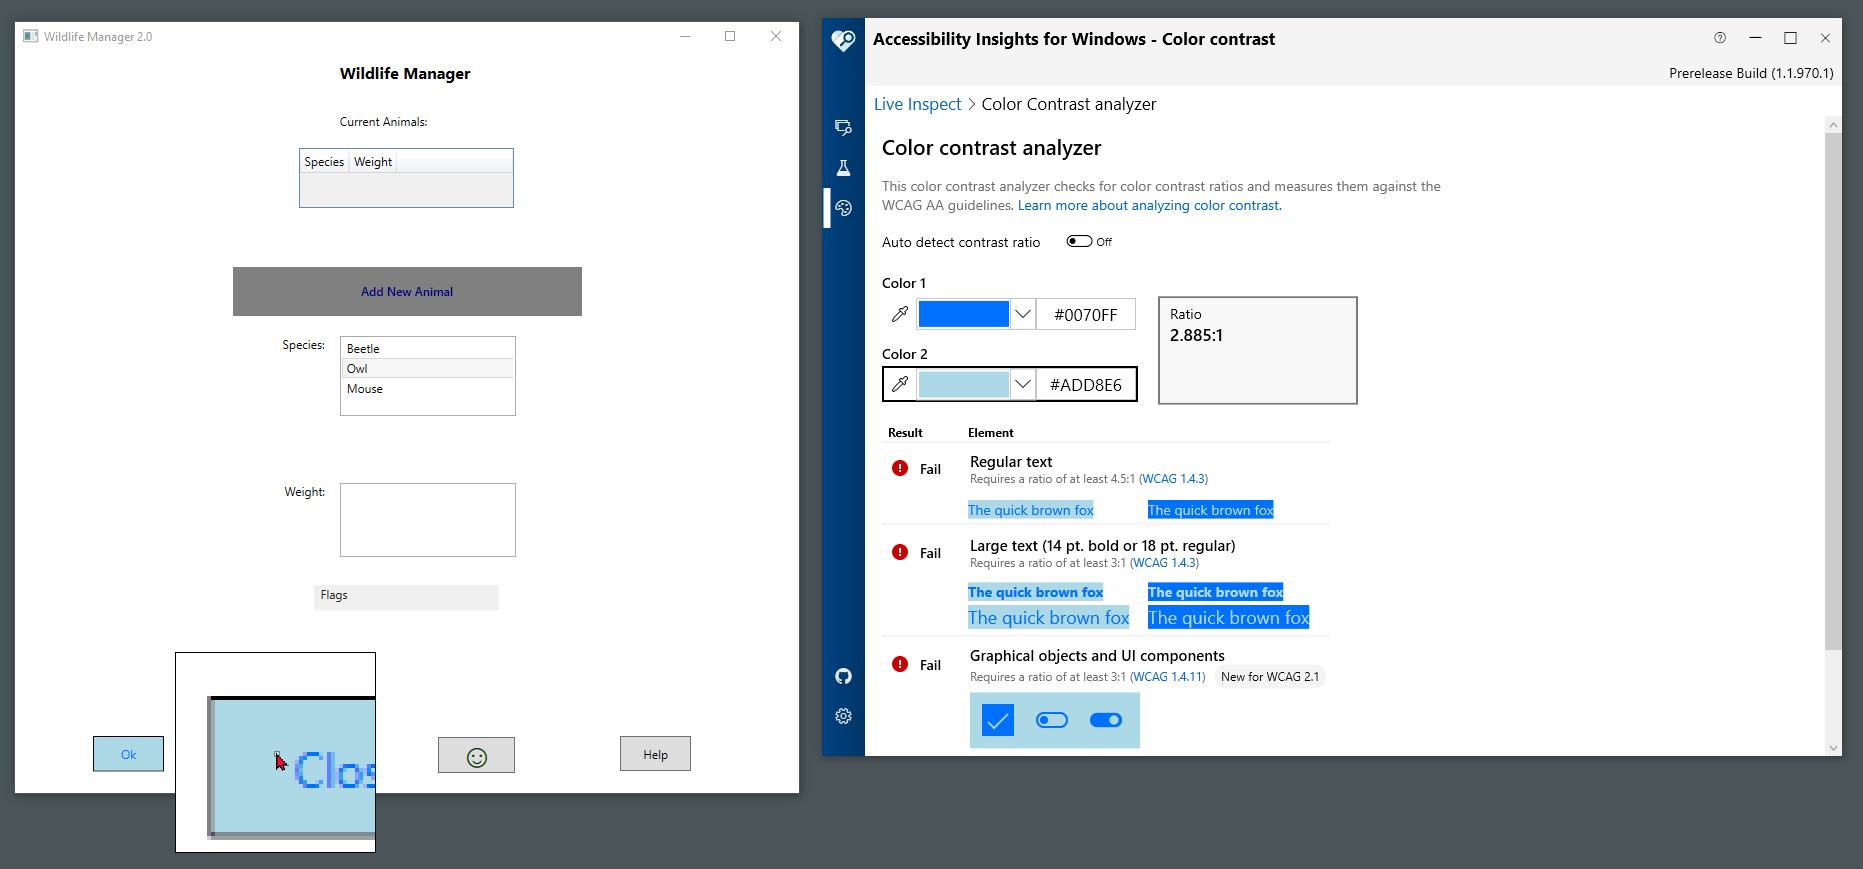 Screenshot showing the target app, a screenshot in the Snip & Sketch tool, and Accessibility Insights for Windows. The mouse is hovering over the blue border of a selected list item in the screenshot. Accessibility Insights for Windows indicates that the contrast ratio between Color 1 (the border color of the unselected list item) and Color 2 (the border color of the selected list item) fails the WCAG Success Criterion for graphical objects and UI components.